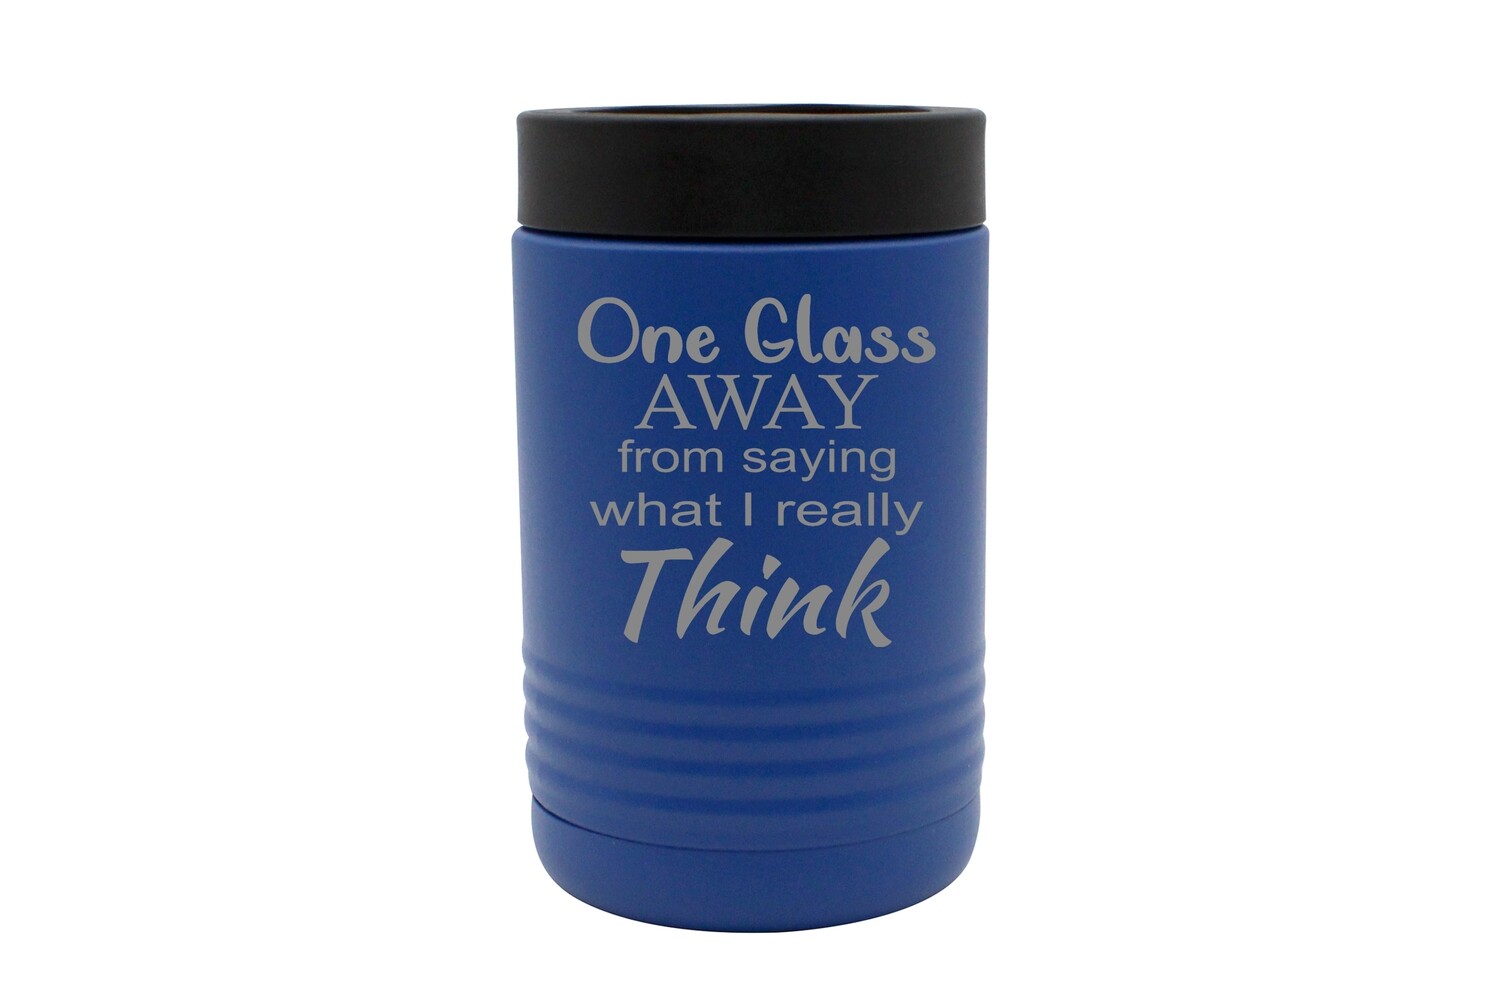 Custom Insulated Beverage Holder with "One Glass Away from Saying what I really Think"